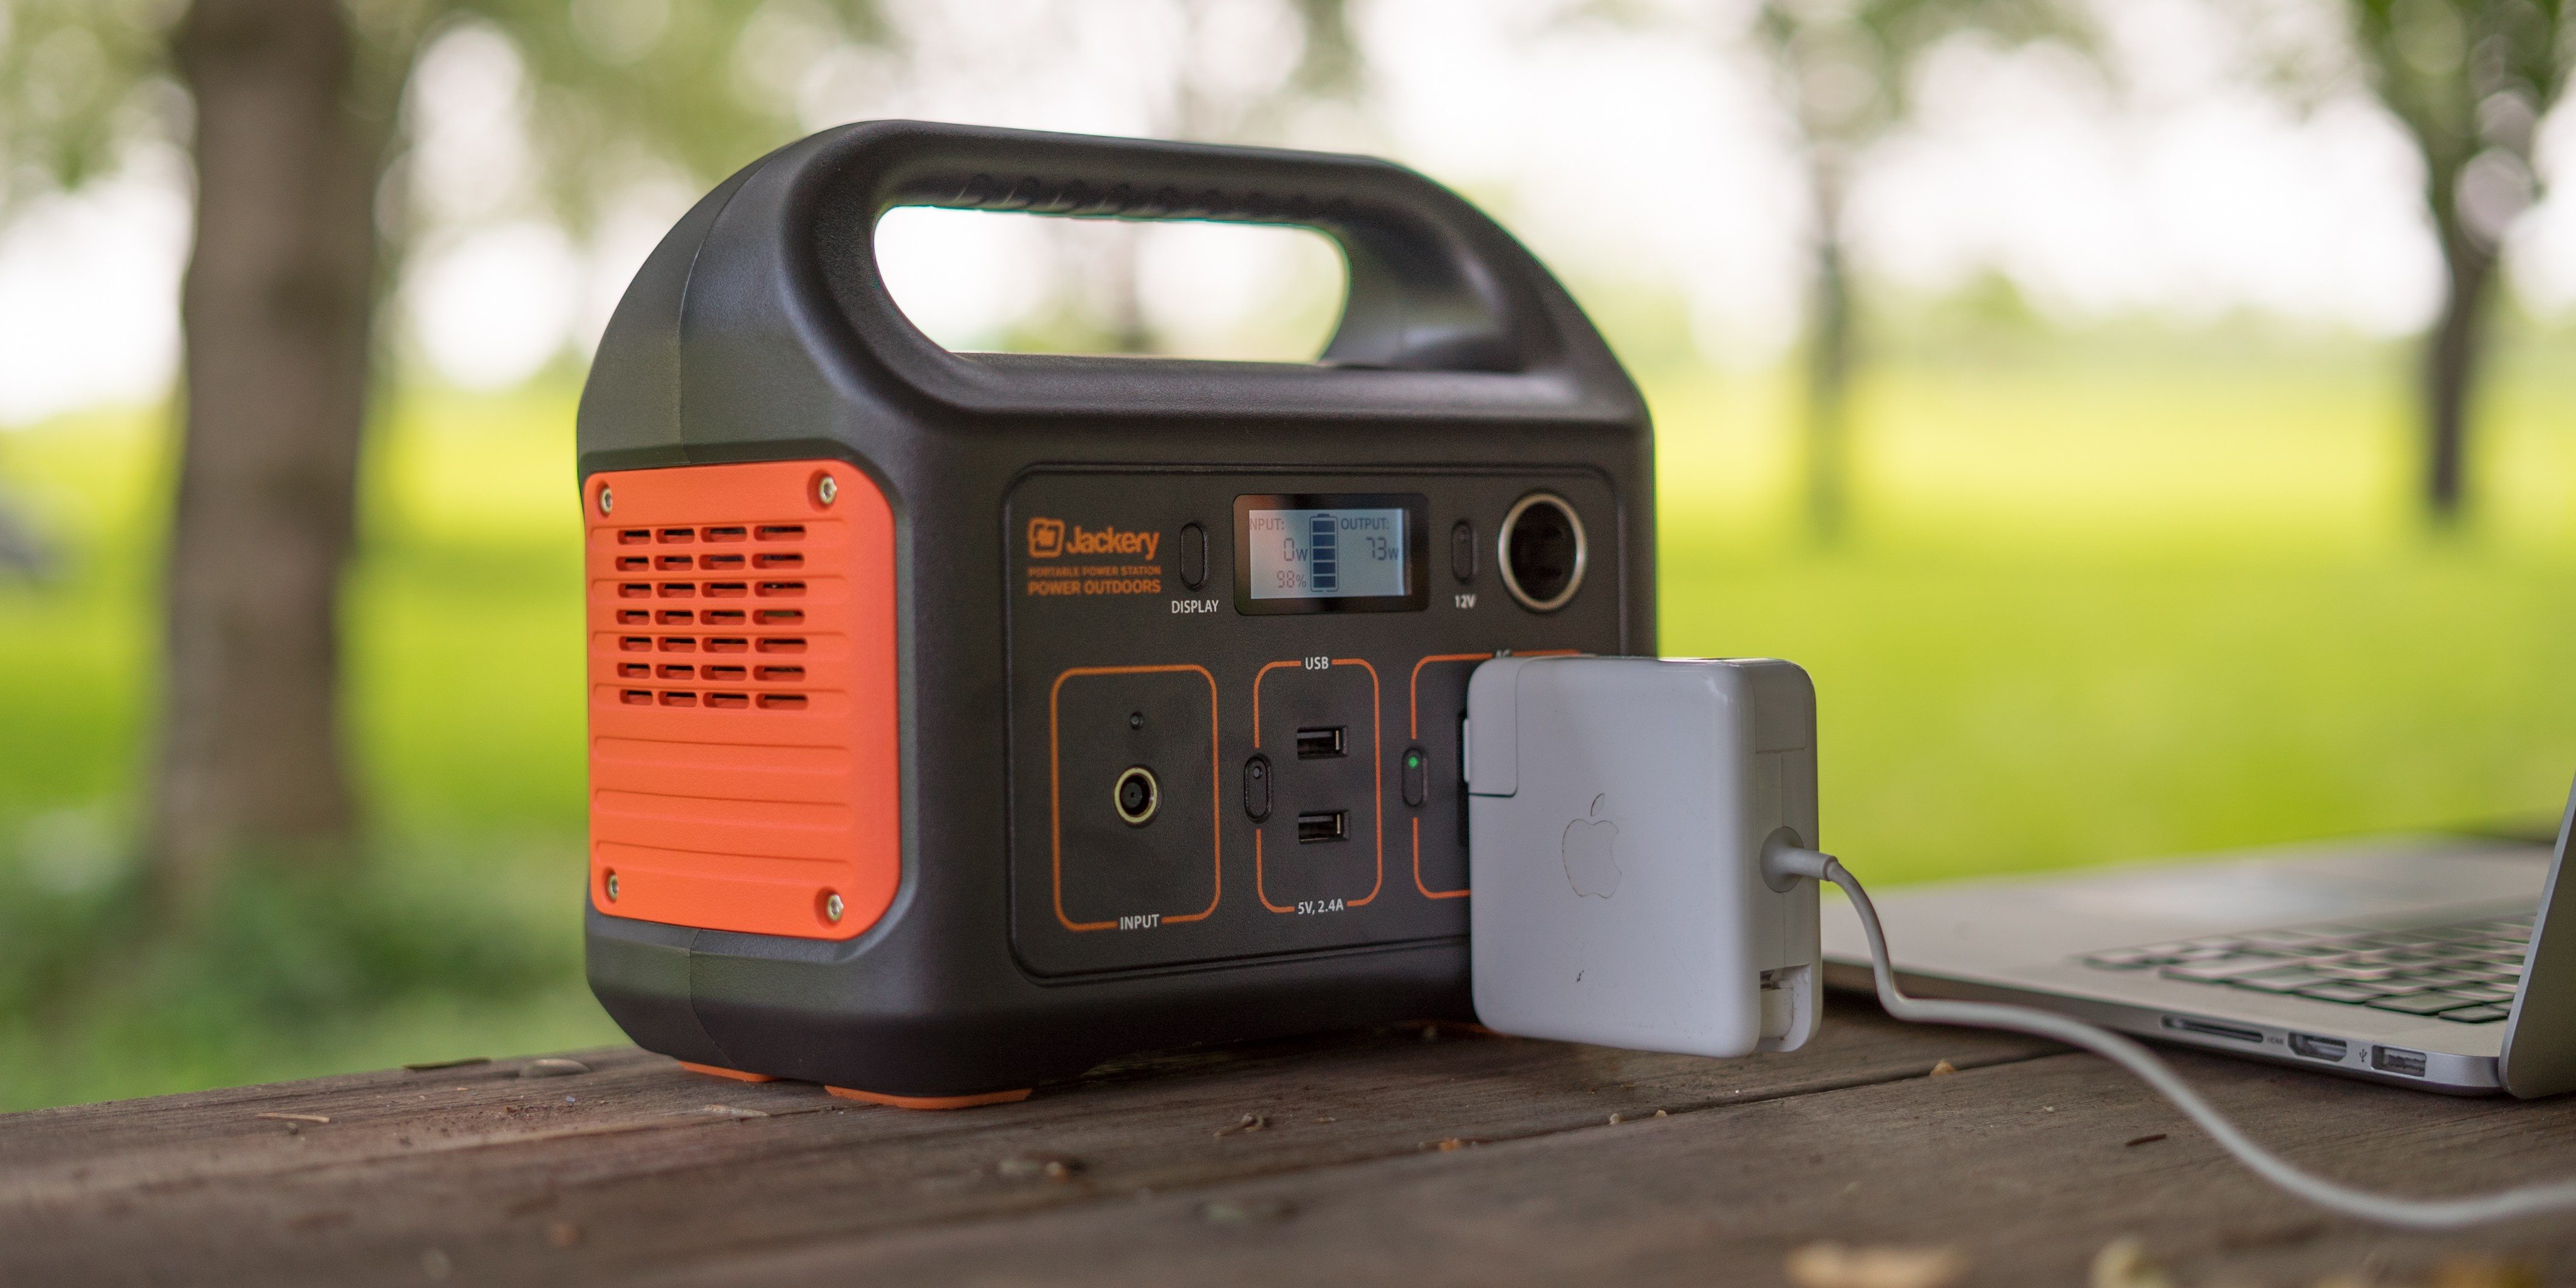 Jackery’s Portable Power Station 240 can be charged via solar, now $200 (Reg. $250), more